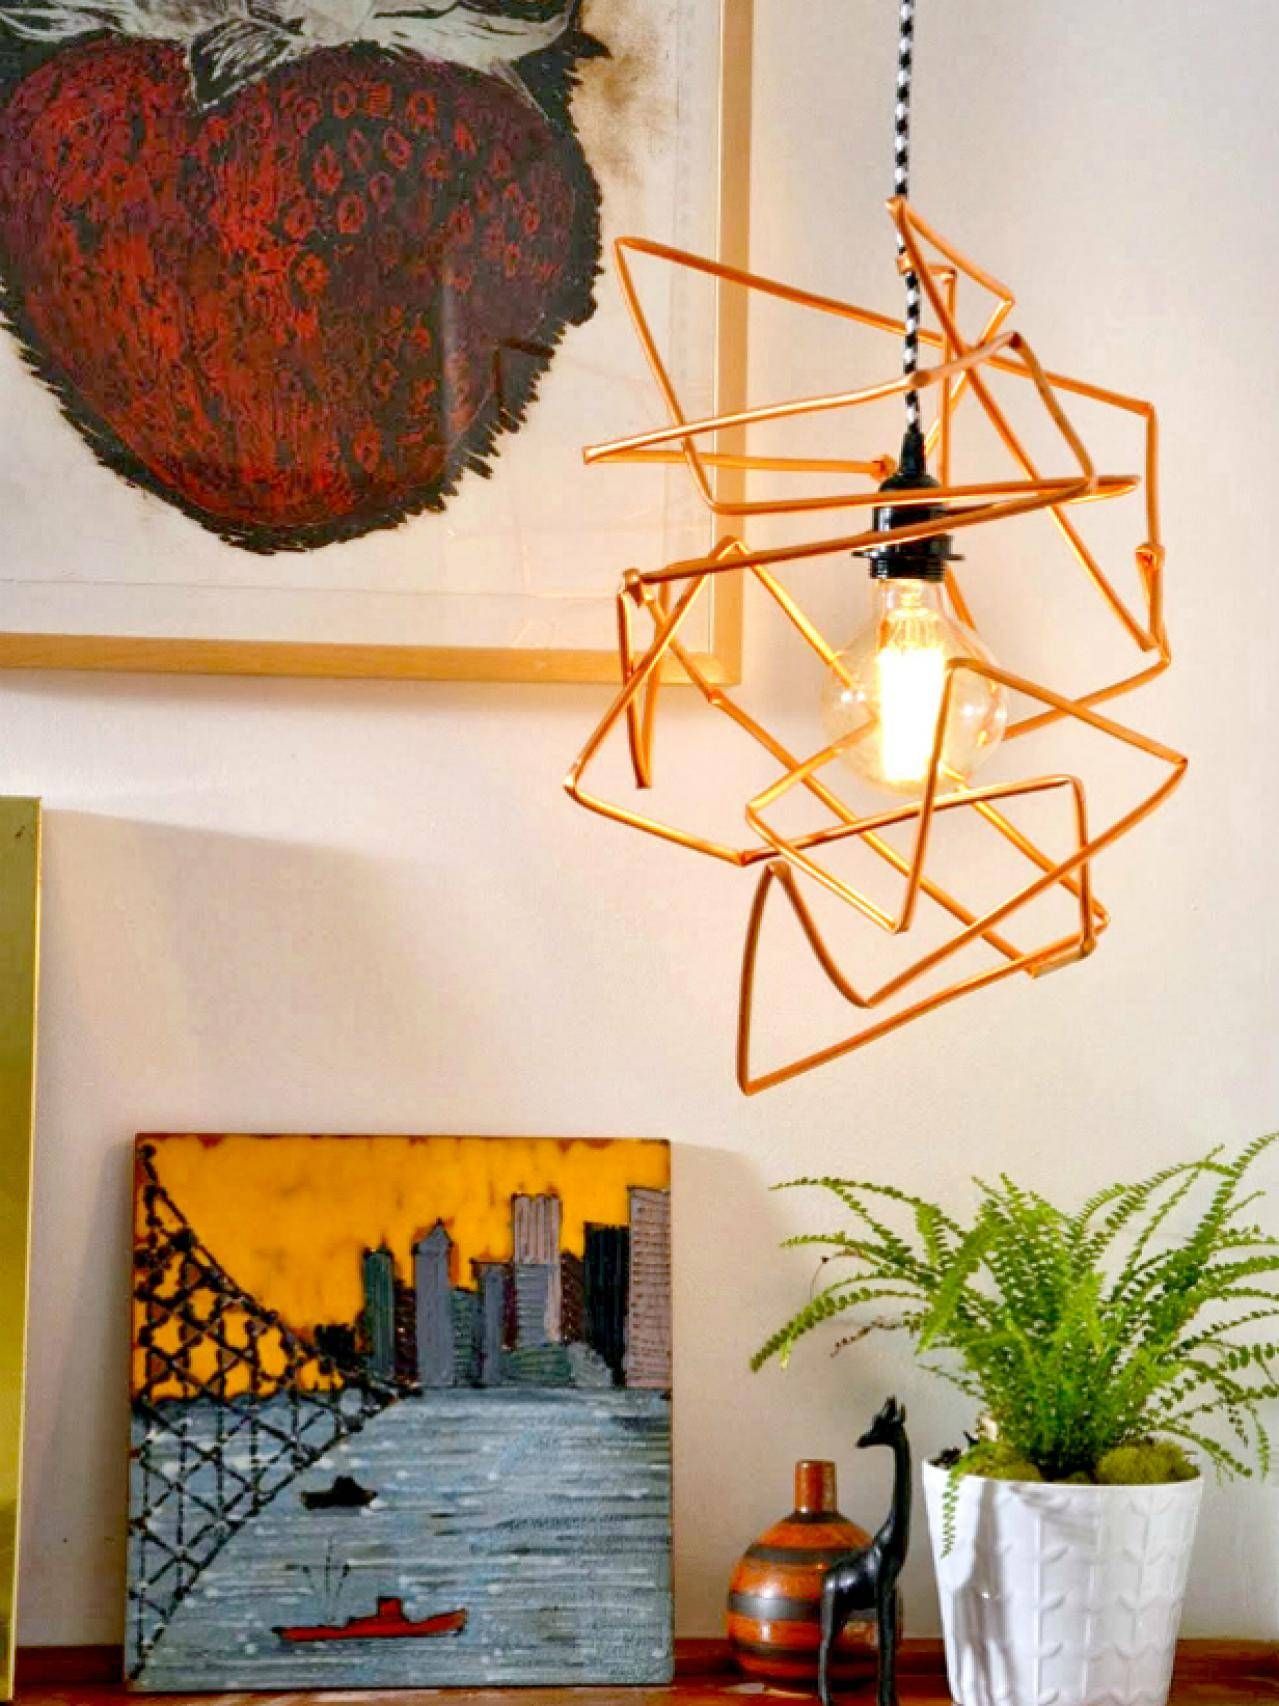 Brighten Up With These Diy Home Lighting Ideas | Hgtv's Decorating With Build Your Own Pendant Lights (Photo 12 of 15)